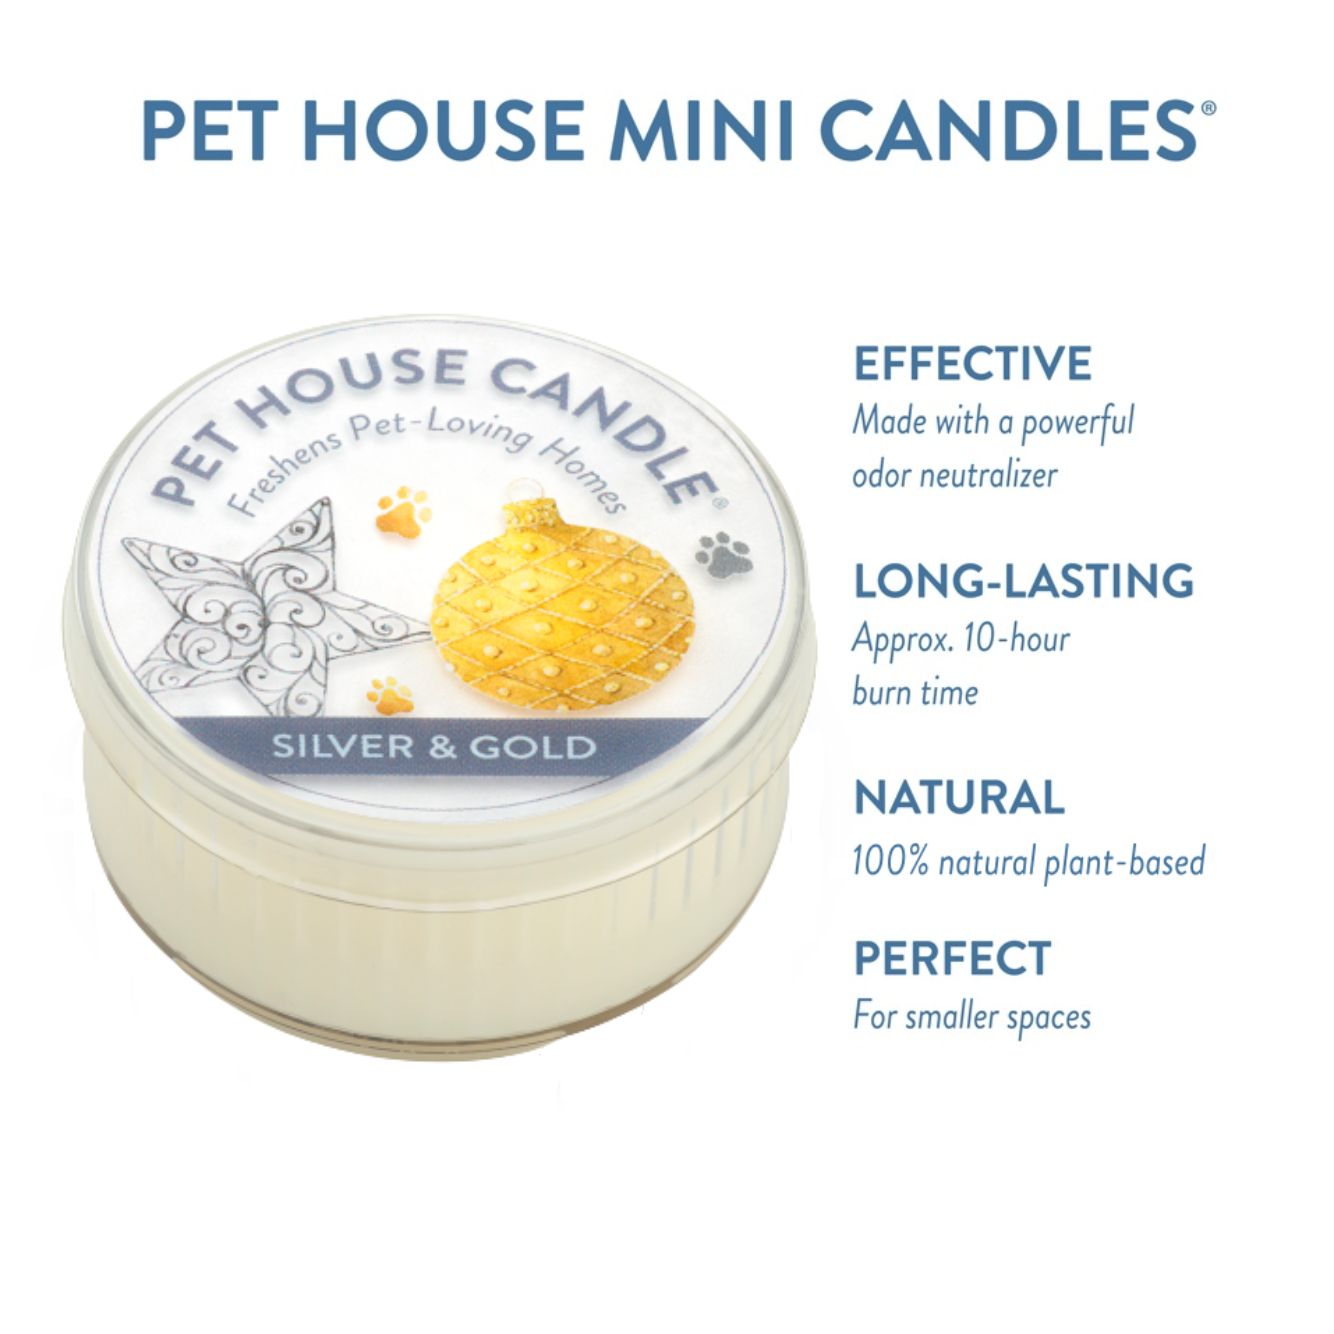 Silver & Gold Mini Candle Infographics